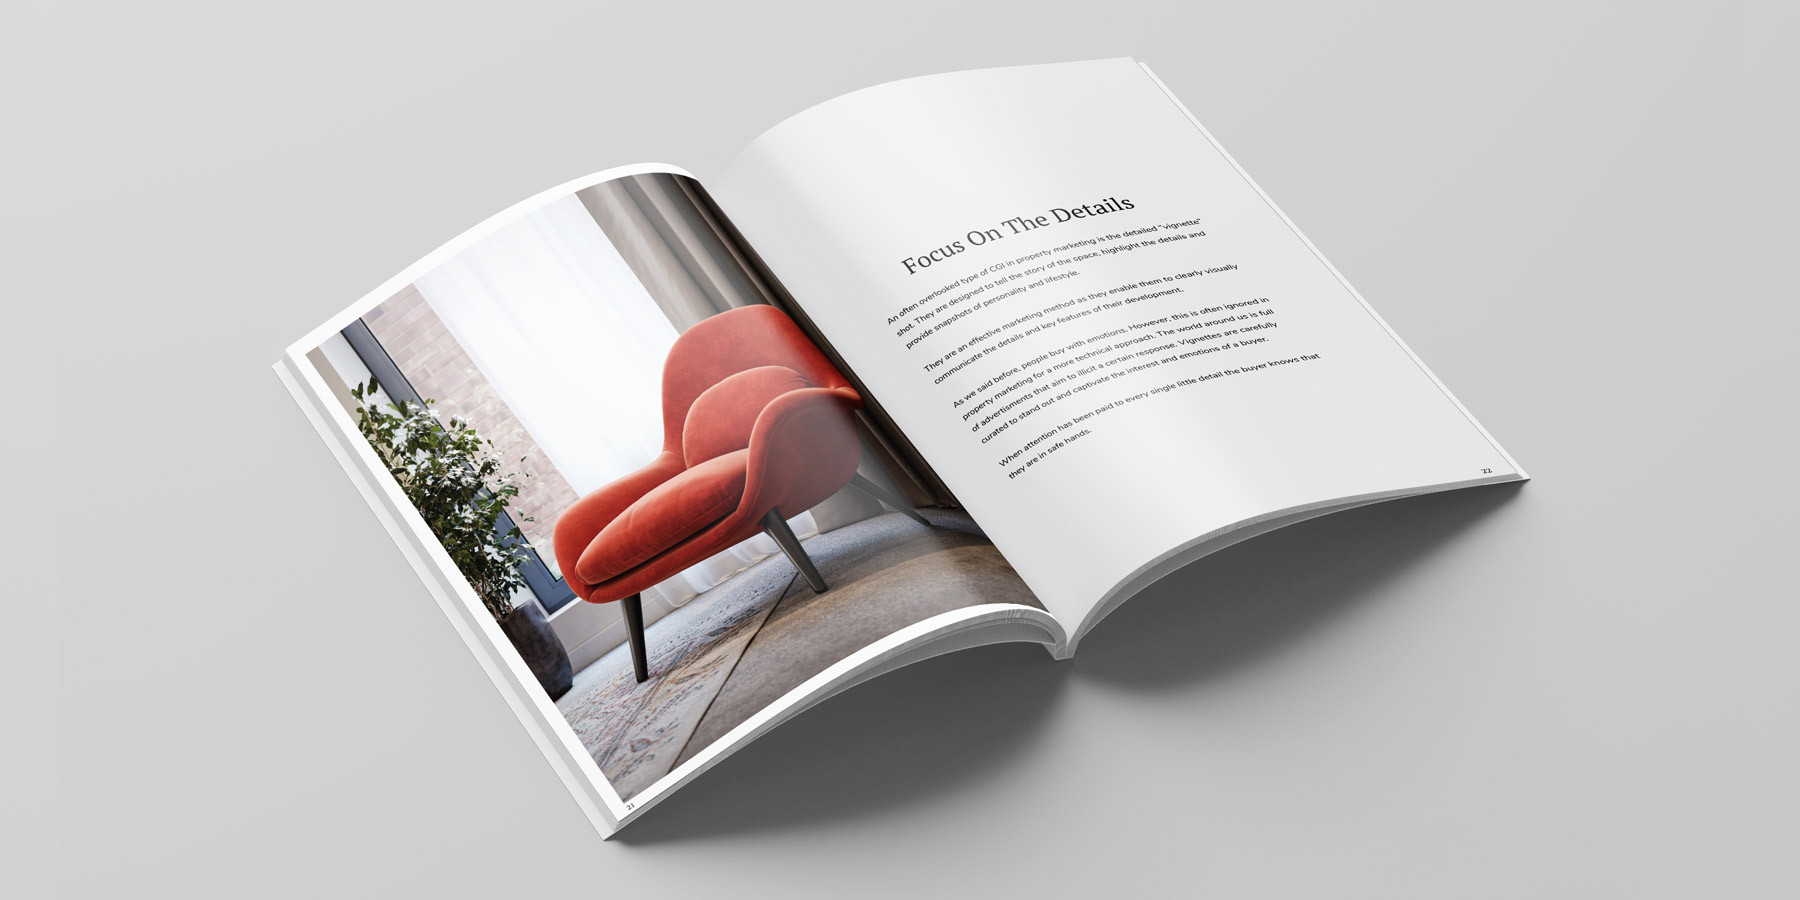 8 Tips to Make an Interior Design Portfolio Stand Out feature image